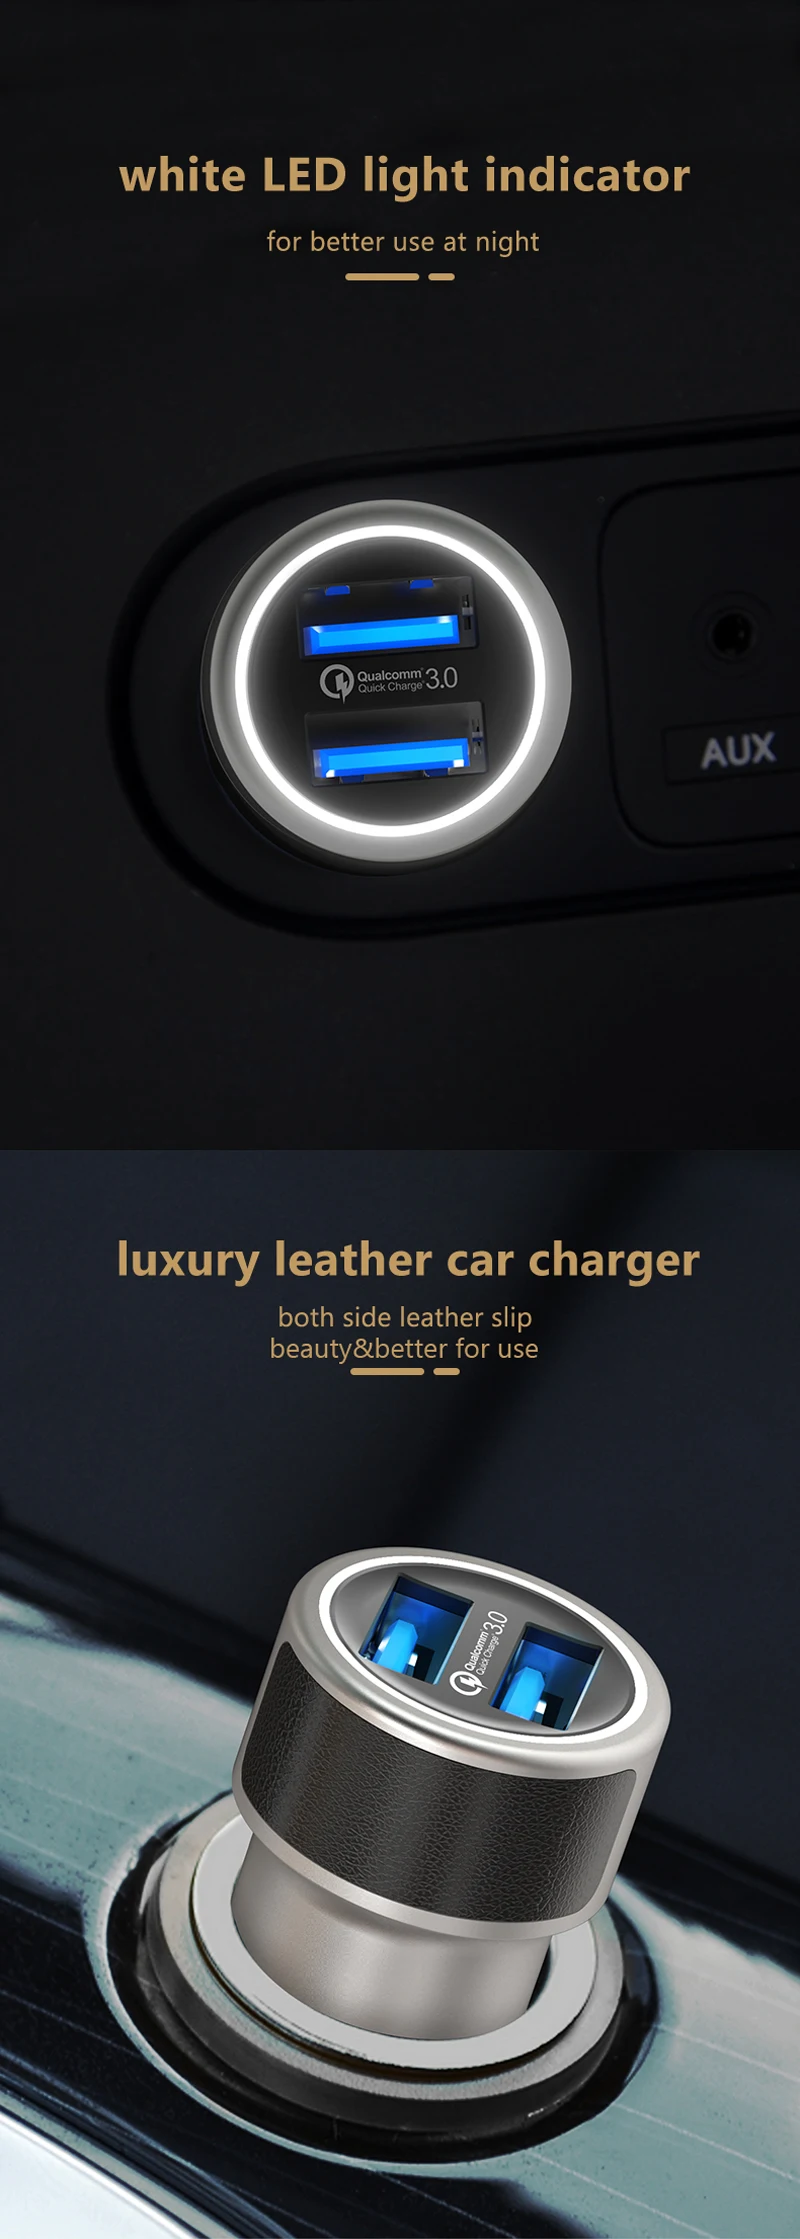 2020 new arrival full metal and leather dual qc 3.0 car charger